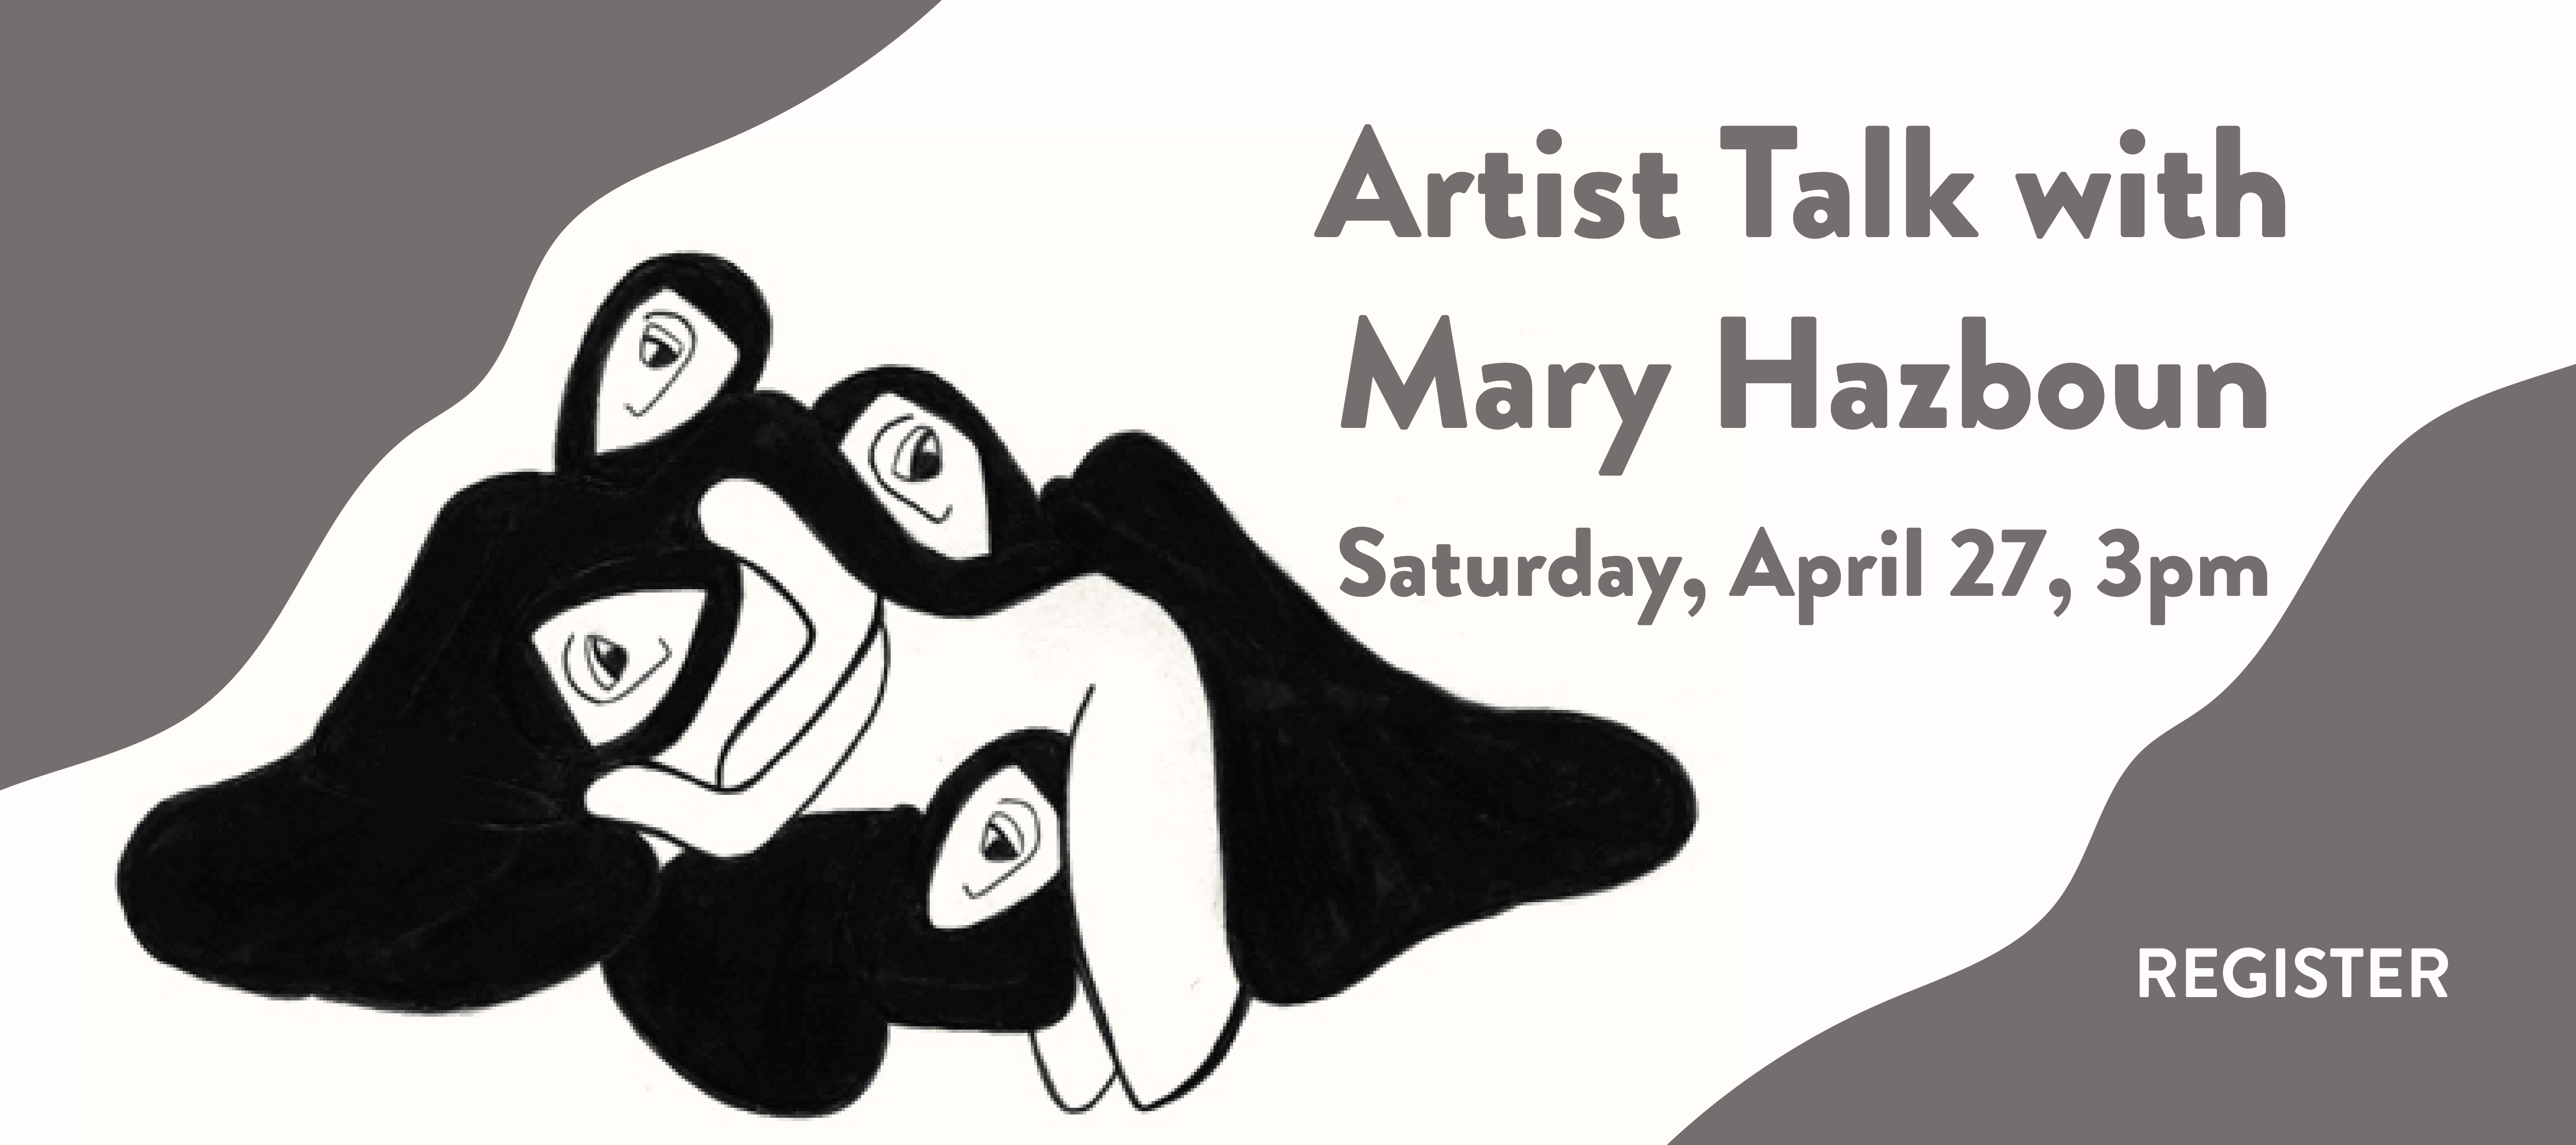 phpl, Prospect Heights Public Library, Mary Hazboun Artist Talk, meet the artist, art discussion, pen and ink, creative conversations, Adult